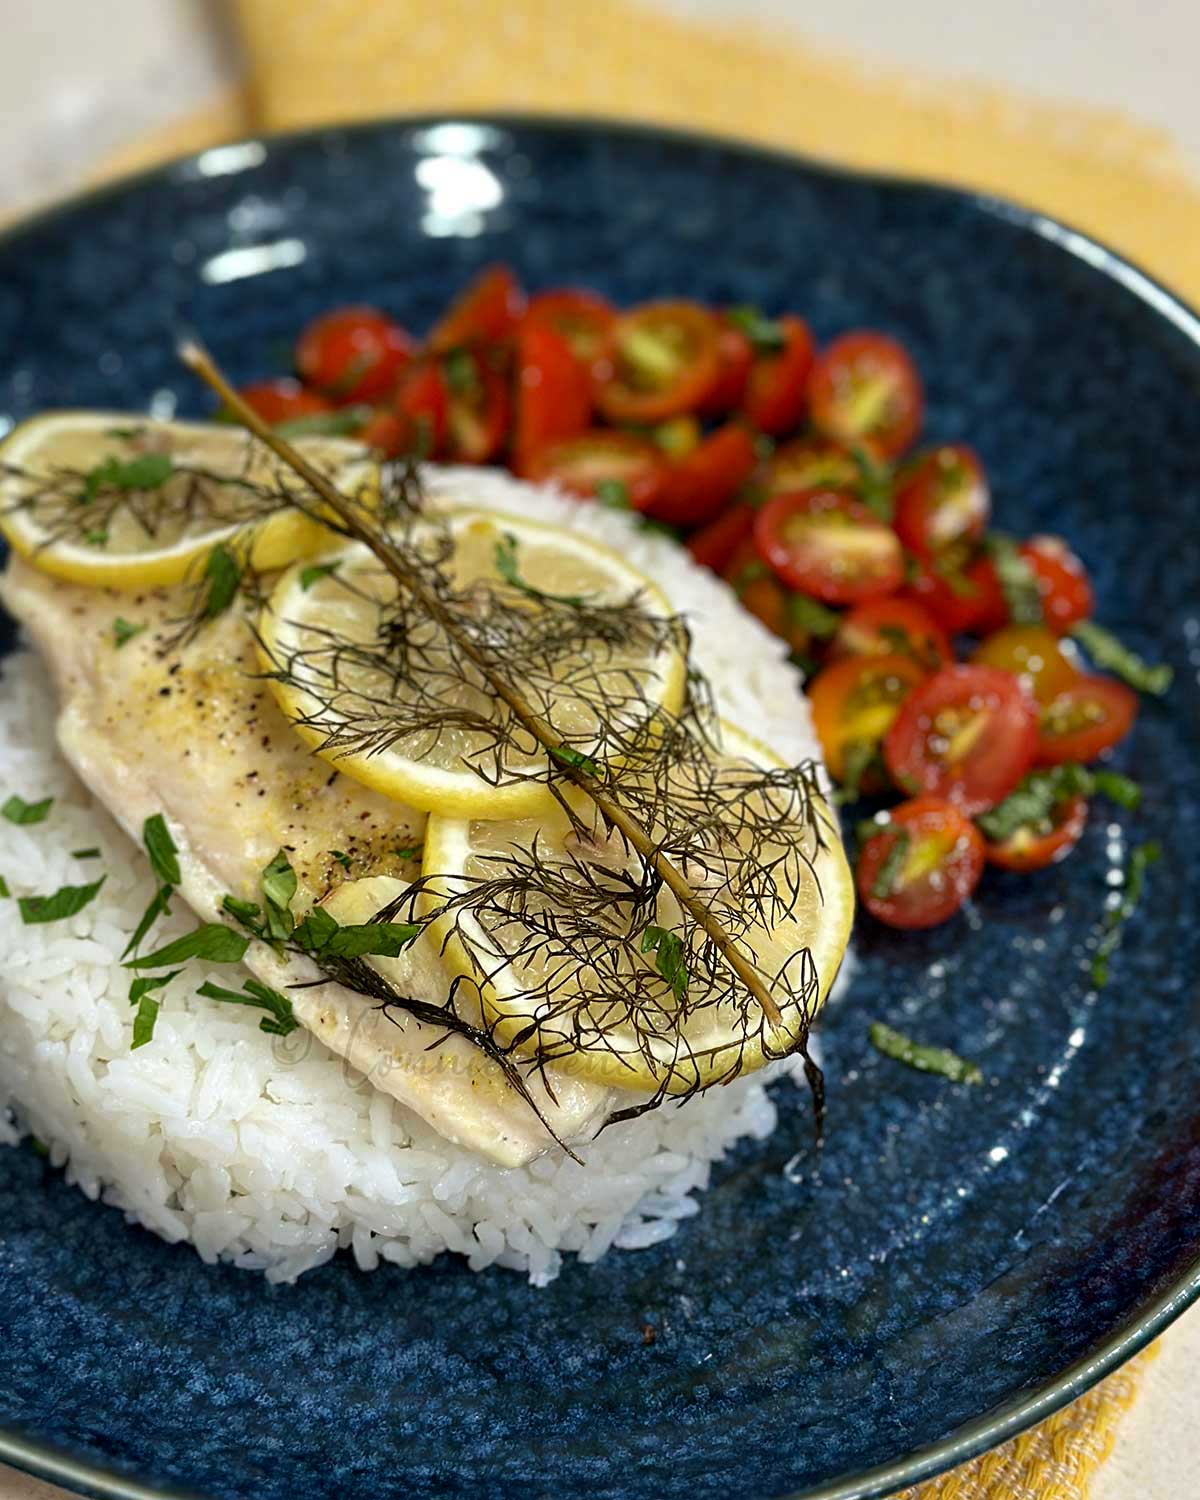 Baked fish with lemon and dill